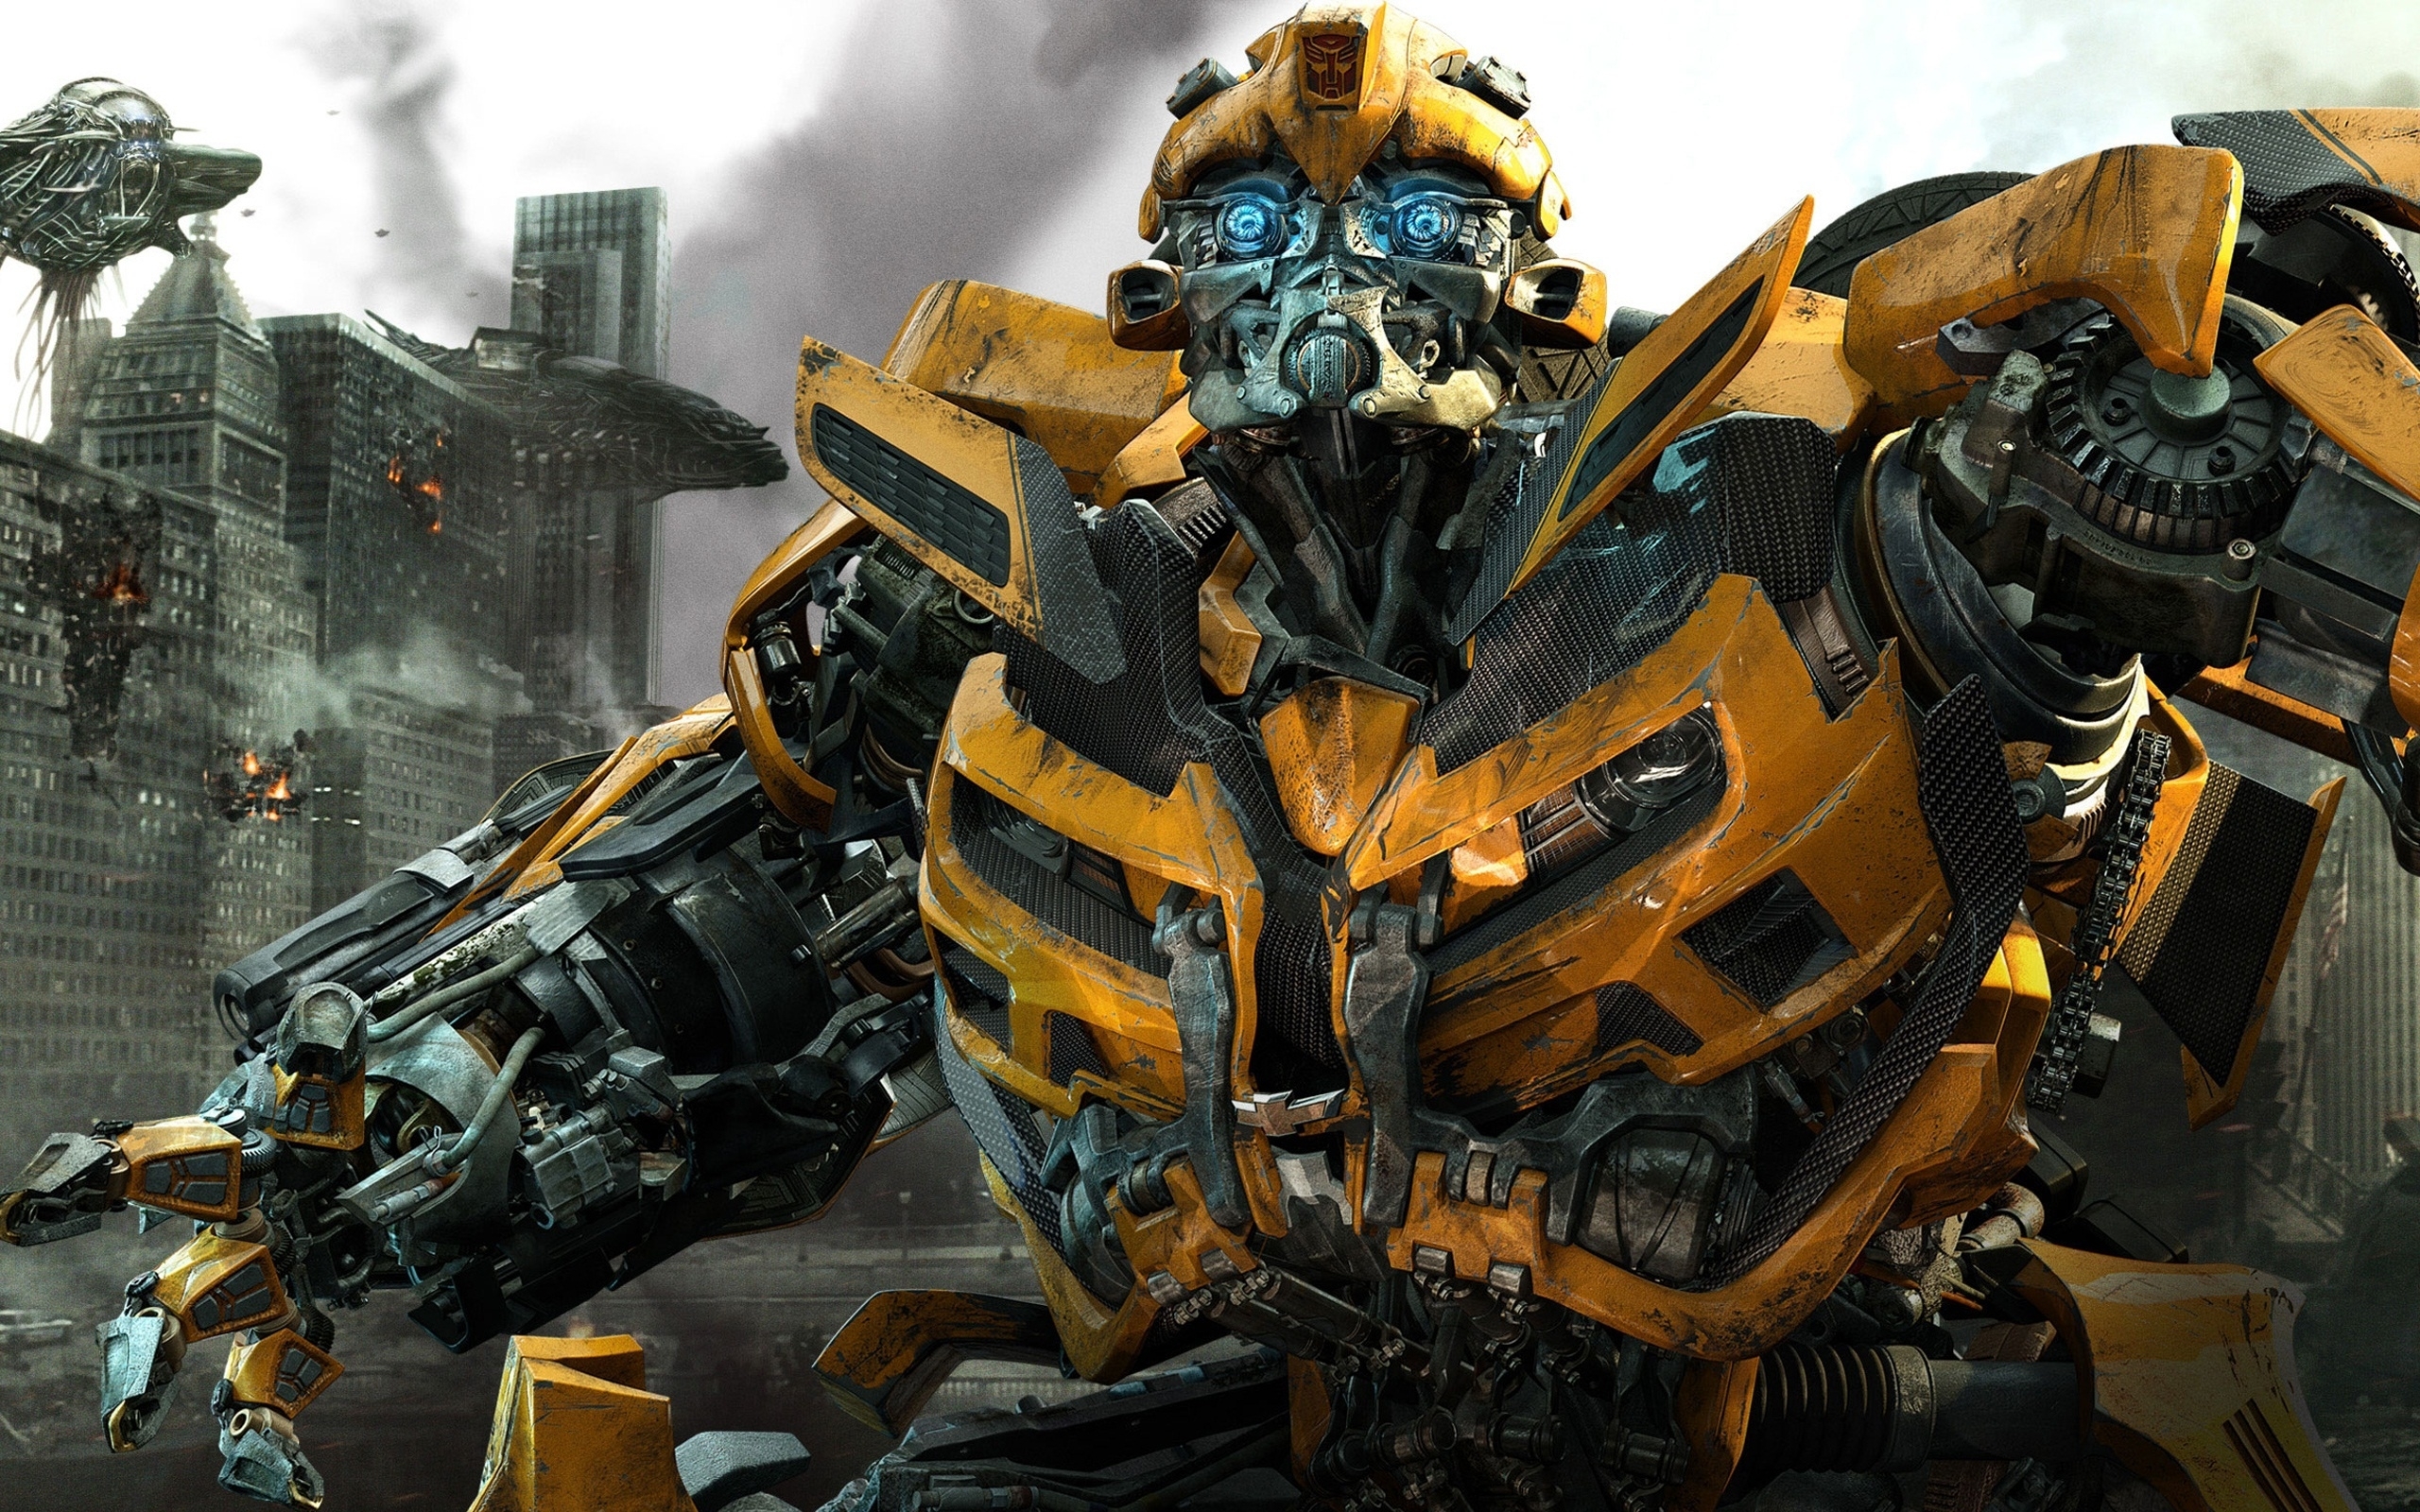 10 Top Transformers Bumble Bee Wallpapers FULL HD 1920×1080 For PC Desktop